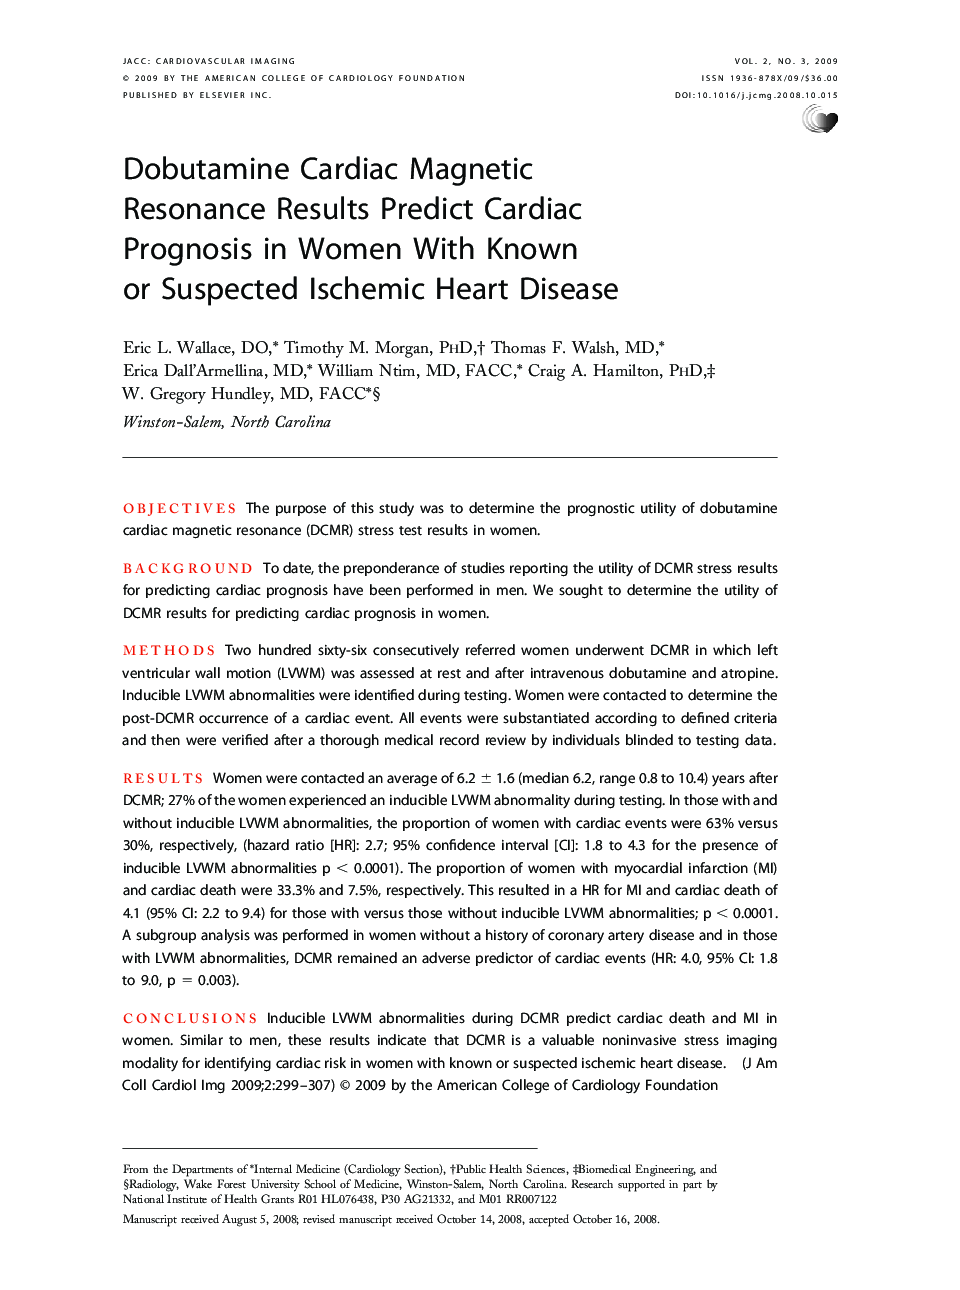 Dobutamine Cardiac Magnetic Resonance Results Predict Cardiac Prognosis in Women With Known or Suspected Ischemic Heart Disease 